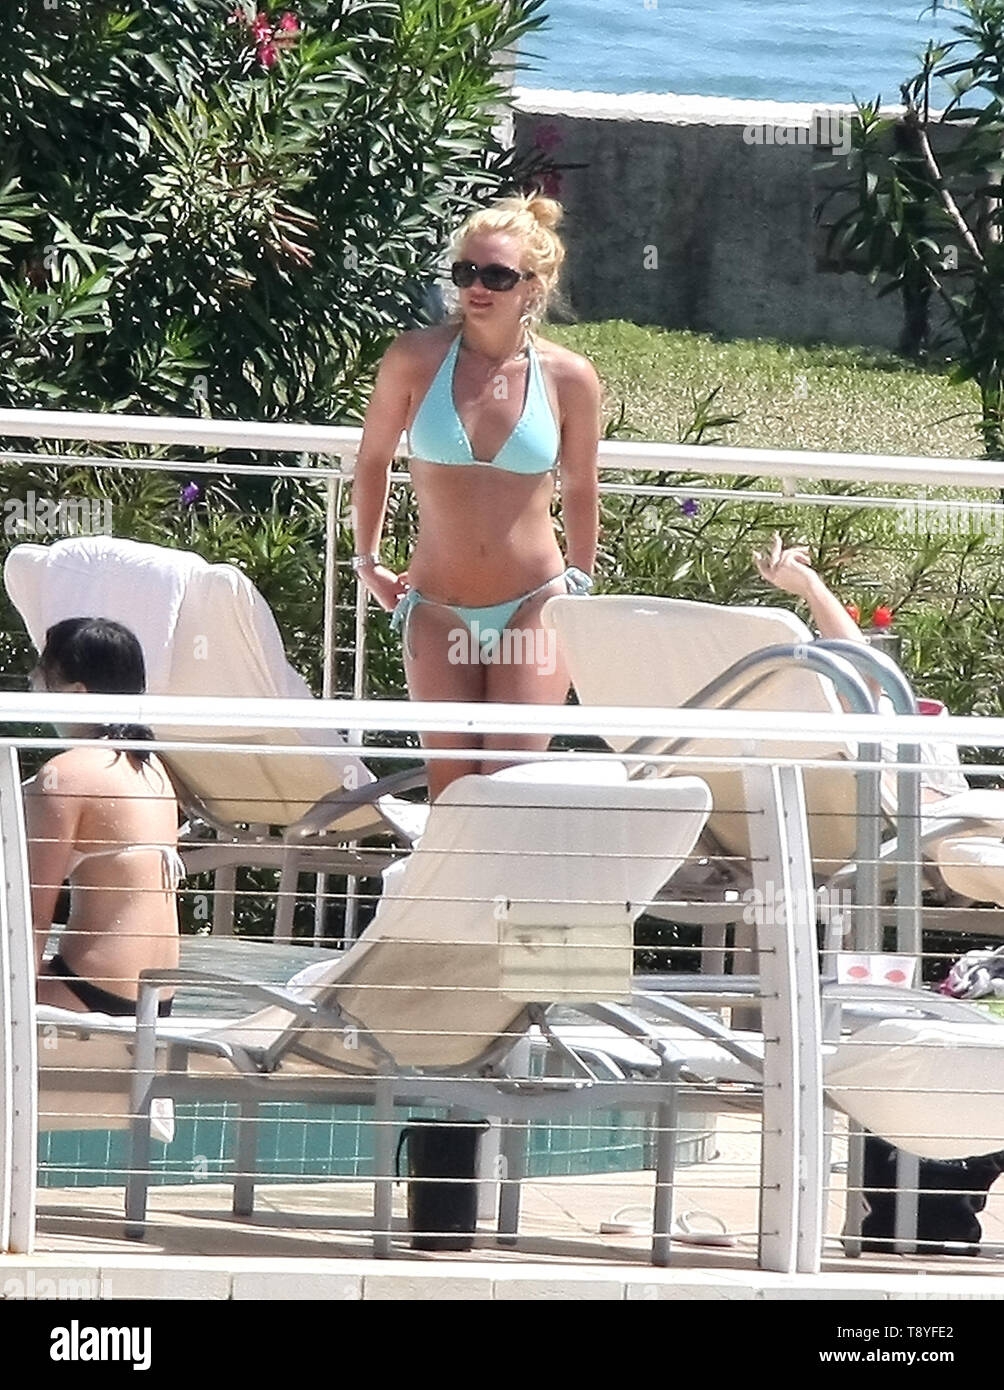 MIAMI BEACH, FL - MARCH 10: Enjoying the second day of her mini Miami  vacation, Britney Spears hits the pool in her blue bikini with sons Sean  Preston and Jayden James, Britney